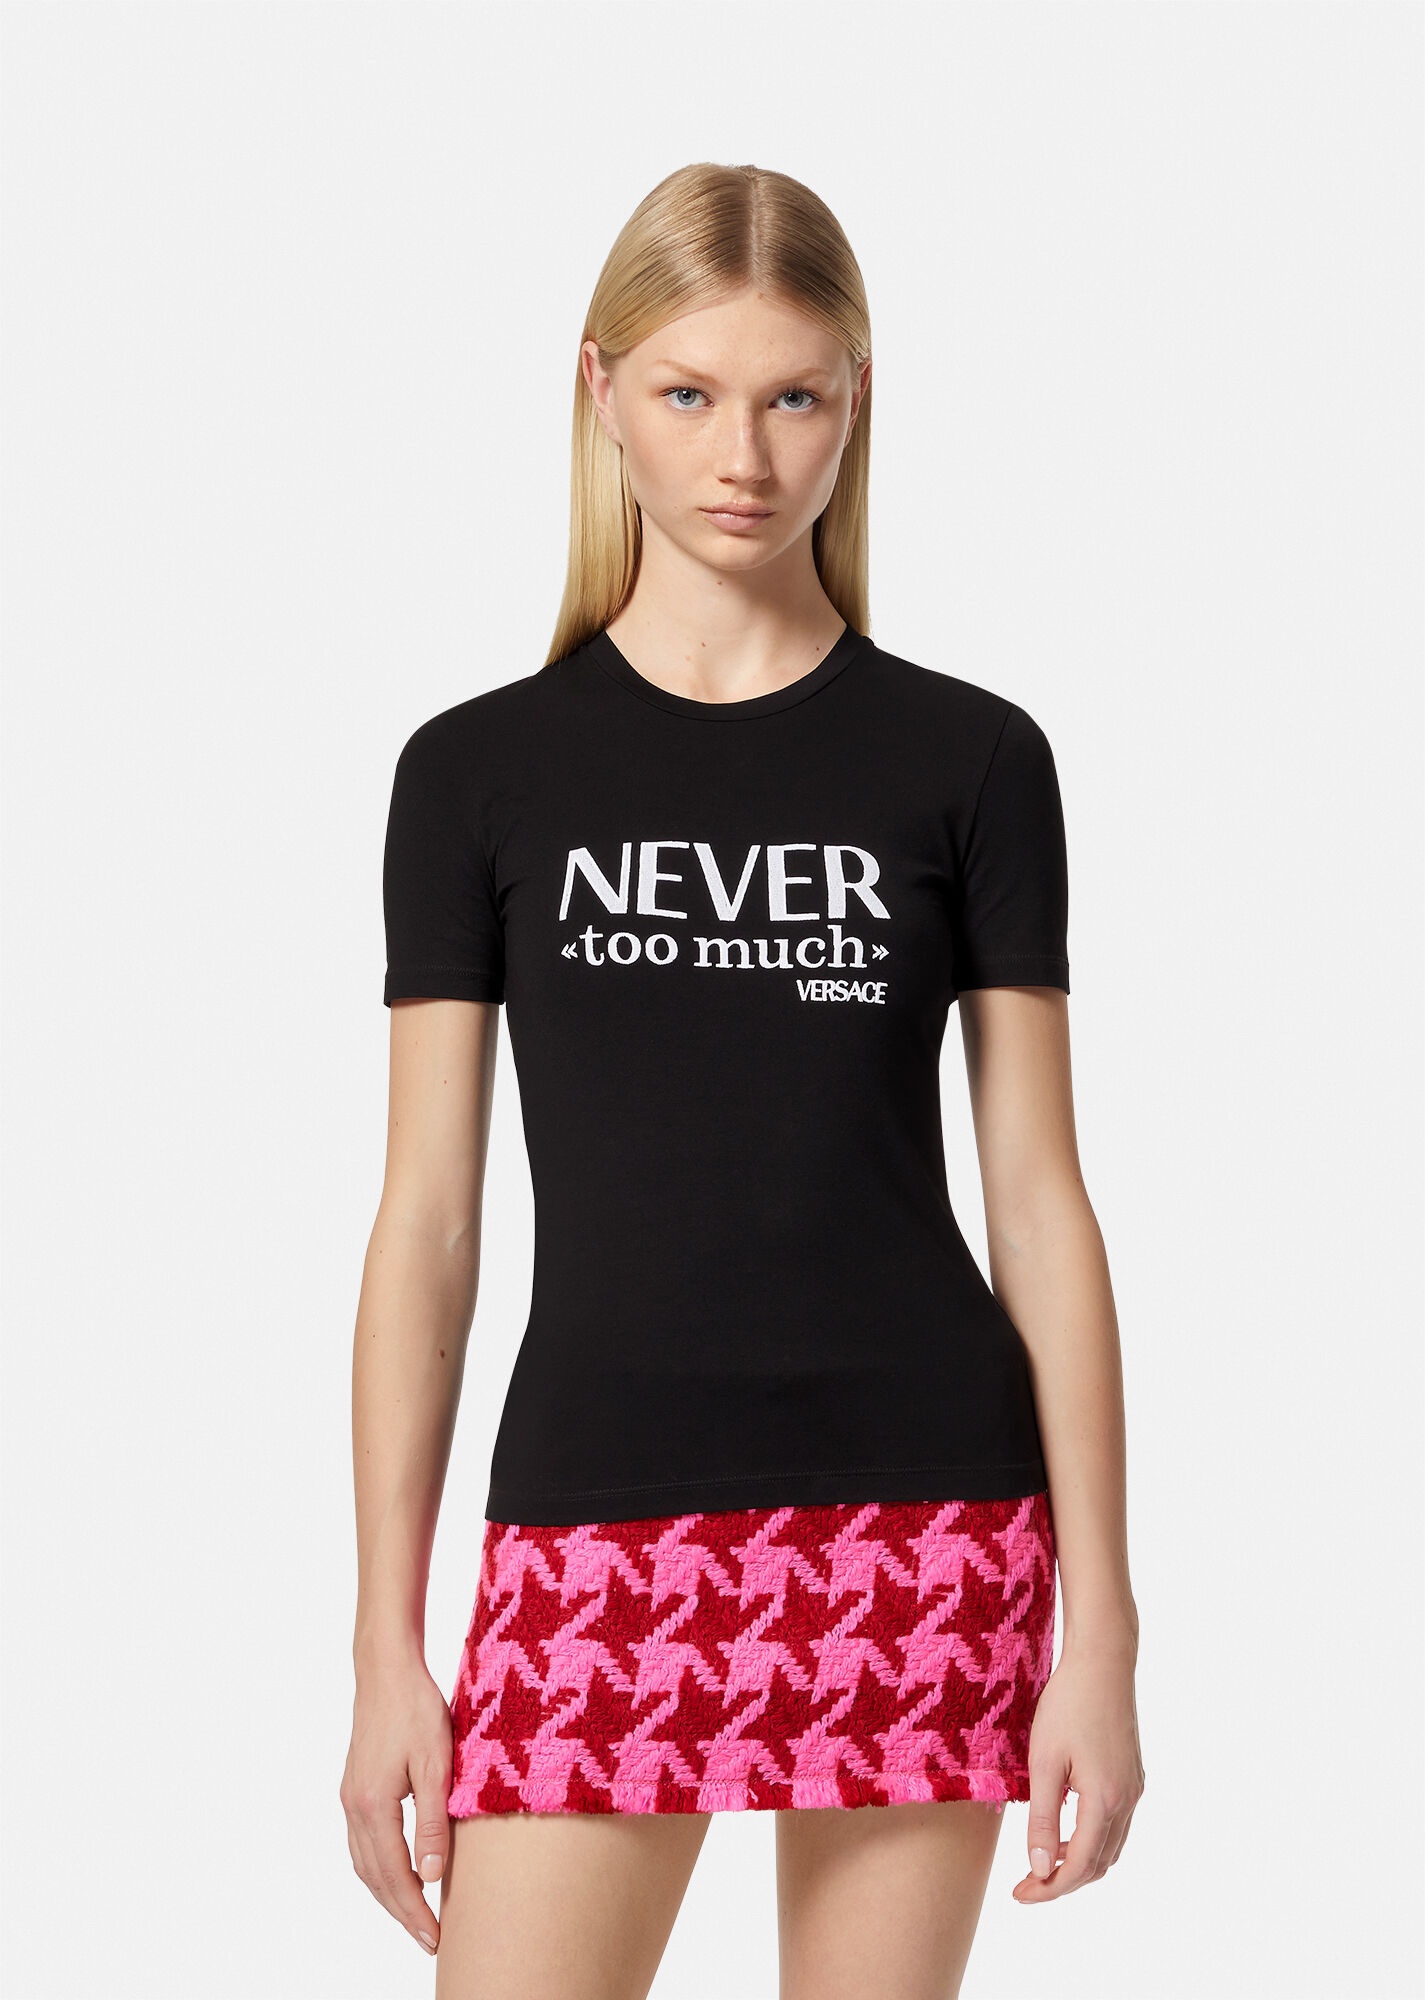 "Never Too Much" T-Shirt - 3